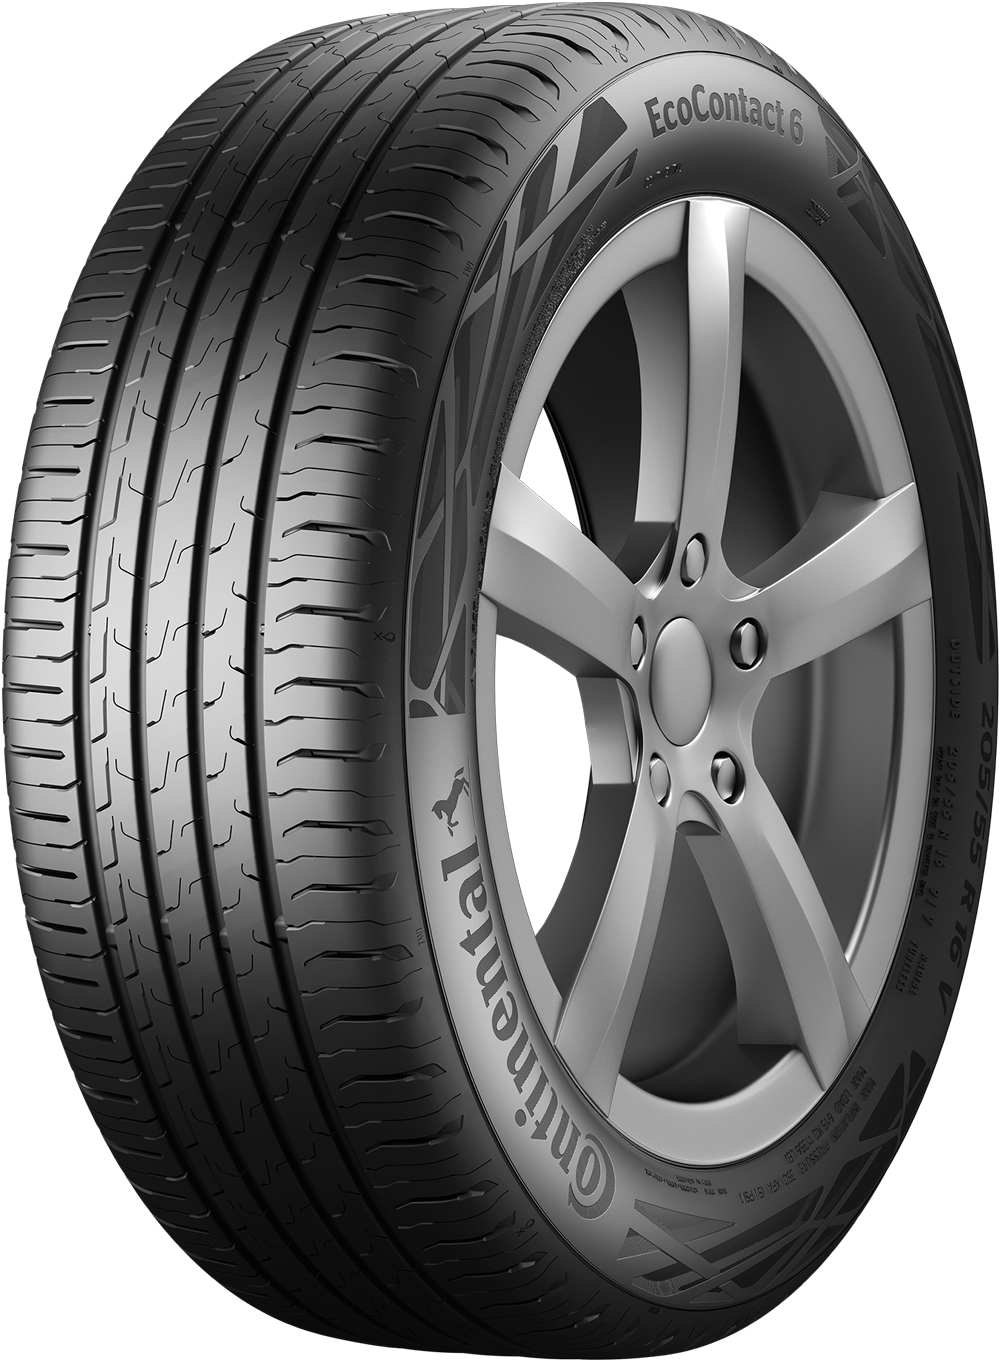 Anvelope auto CONTINENTAL ECO 6 MO XL MERCEDES 235/55 R18 104T